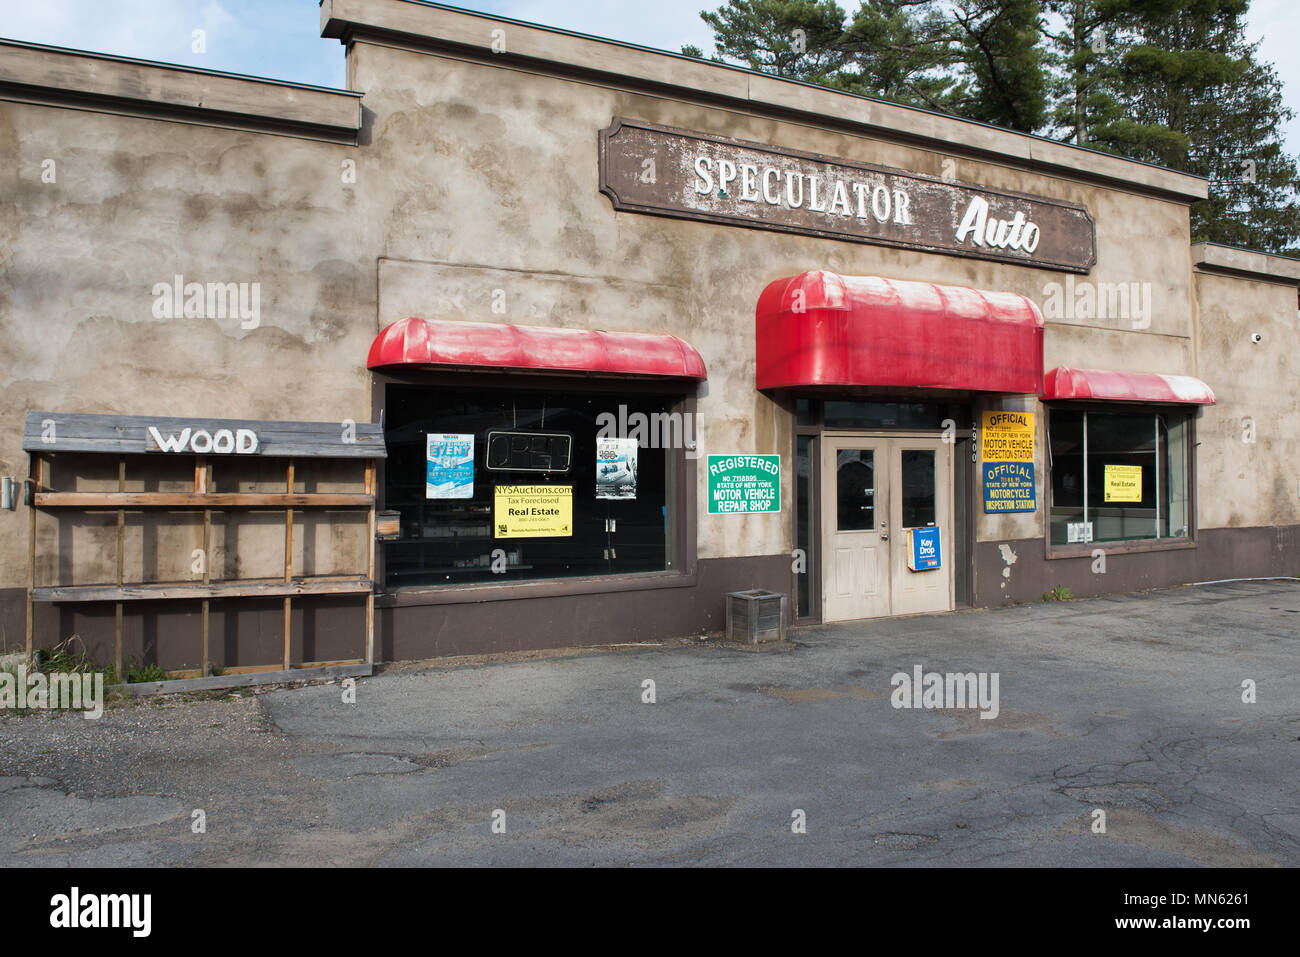 A building from a failed business up for auction due to tax foreclosure in Speculator, NY USA Stock Photo